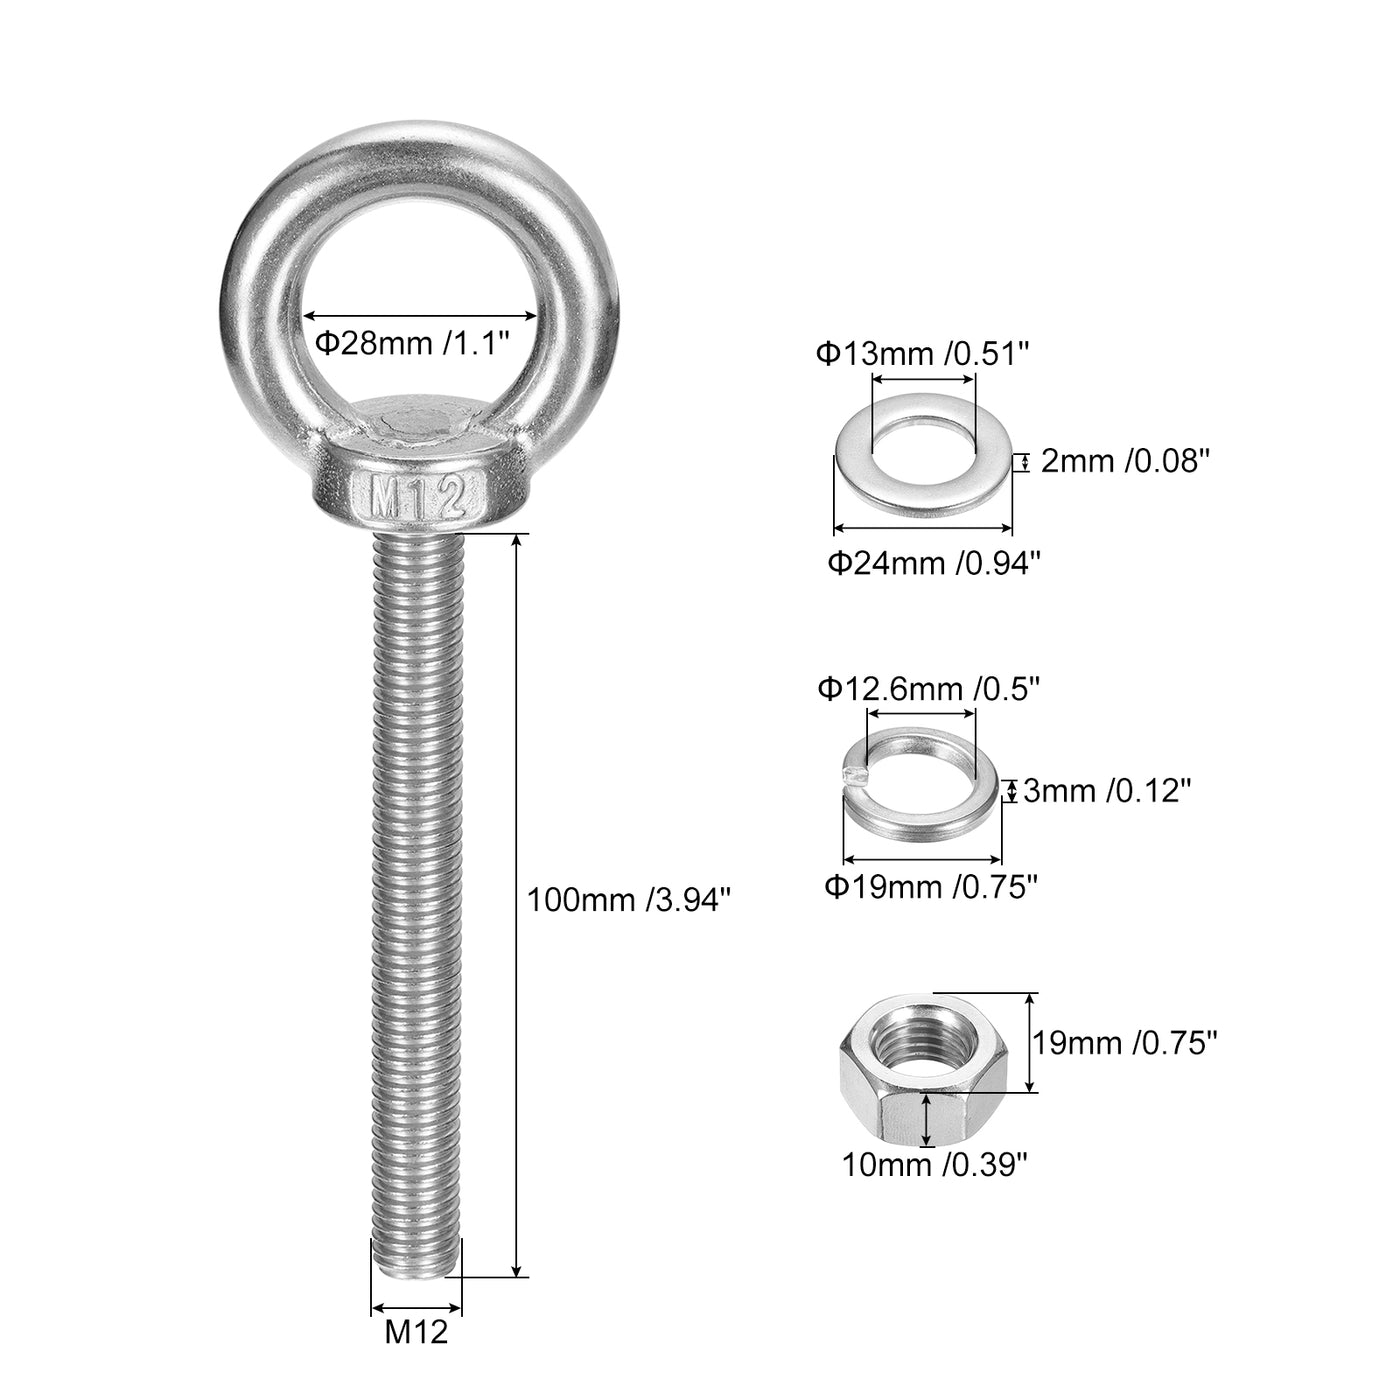 uxcell Uxcell Lifting Eye Bolt, 1 Set M12x100mm Eye Bolt with Nut Washer 304 Stainless Steel